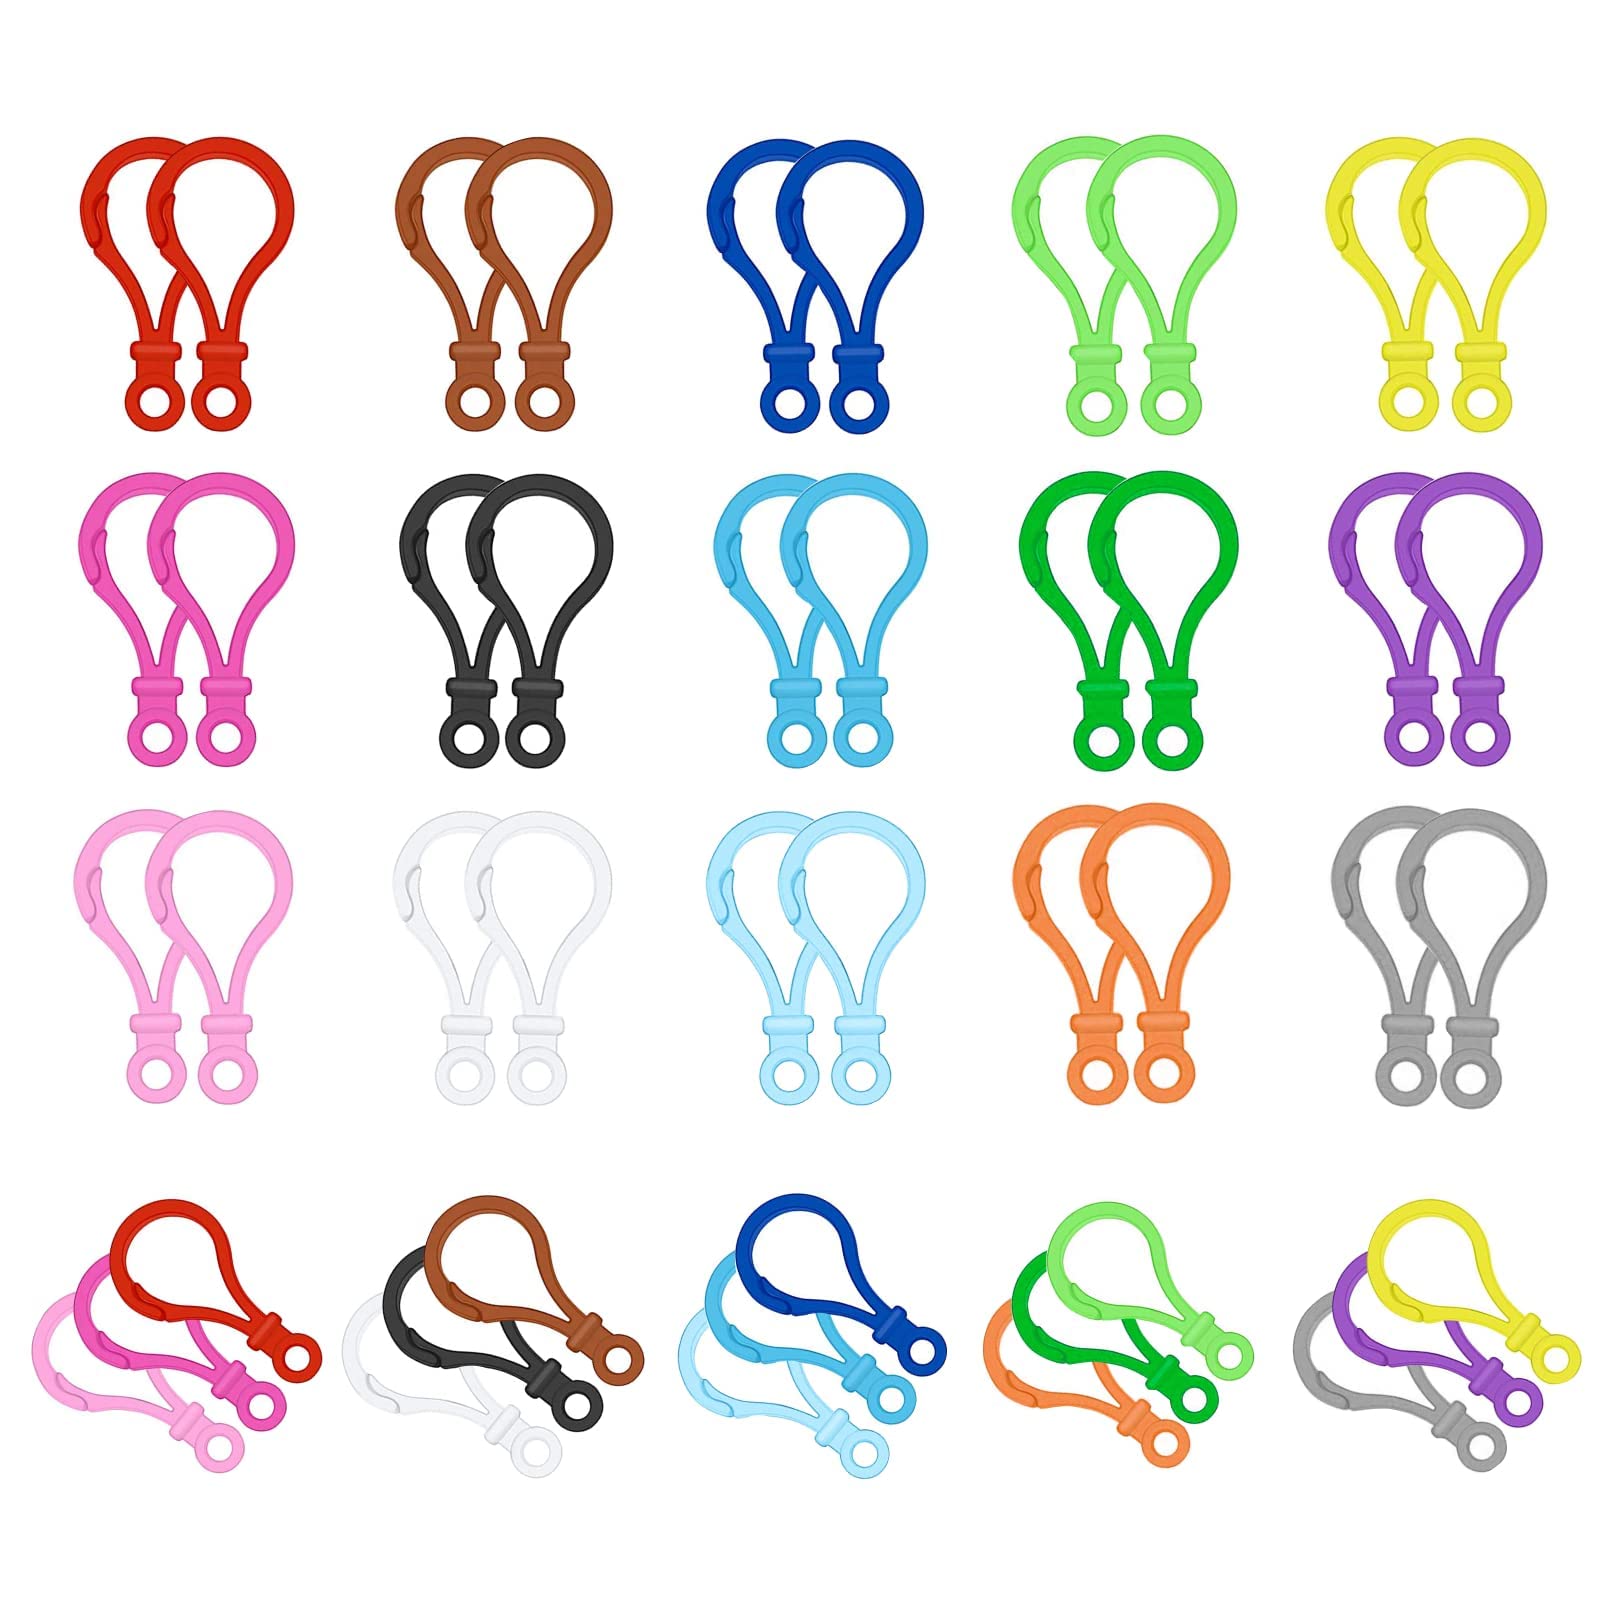 Falody 20pcs Plastic Lobster Clasp ,Plastic Lobster Claw Clasp with  Stainless Steel Lobster Clasp Plastic Lobster Hooks for Backpack Clasp Toy